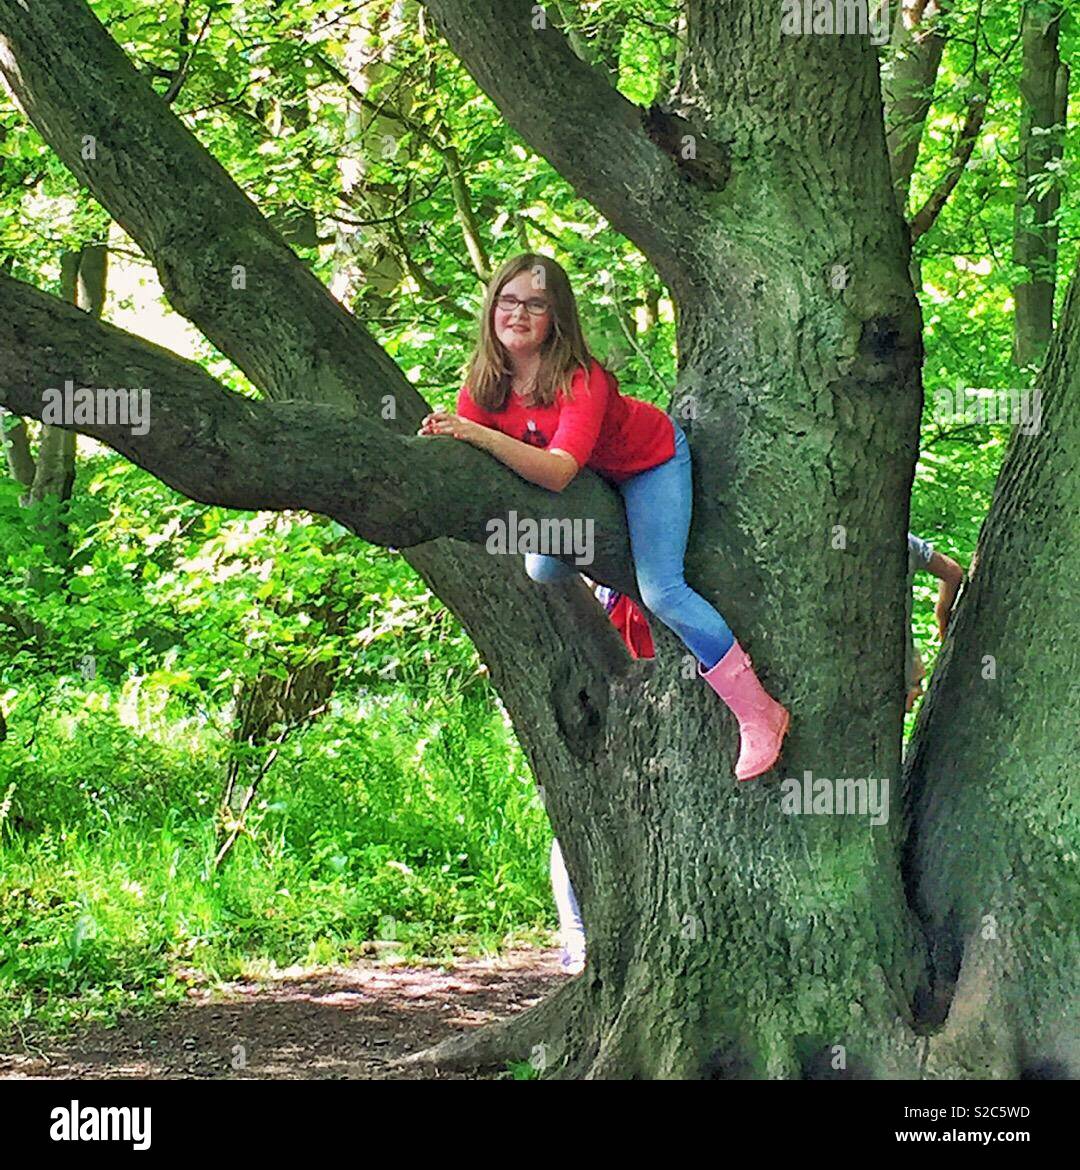 Just hanging around in a tree in the woods Stock Photo